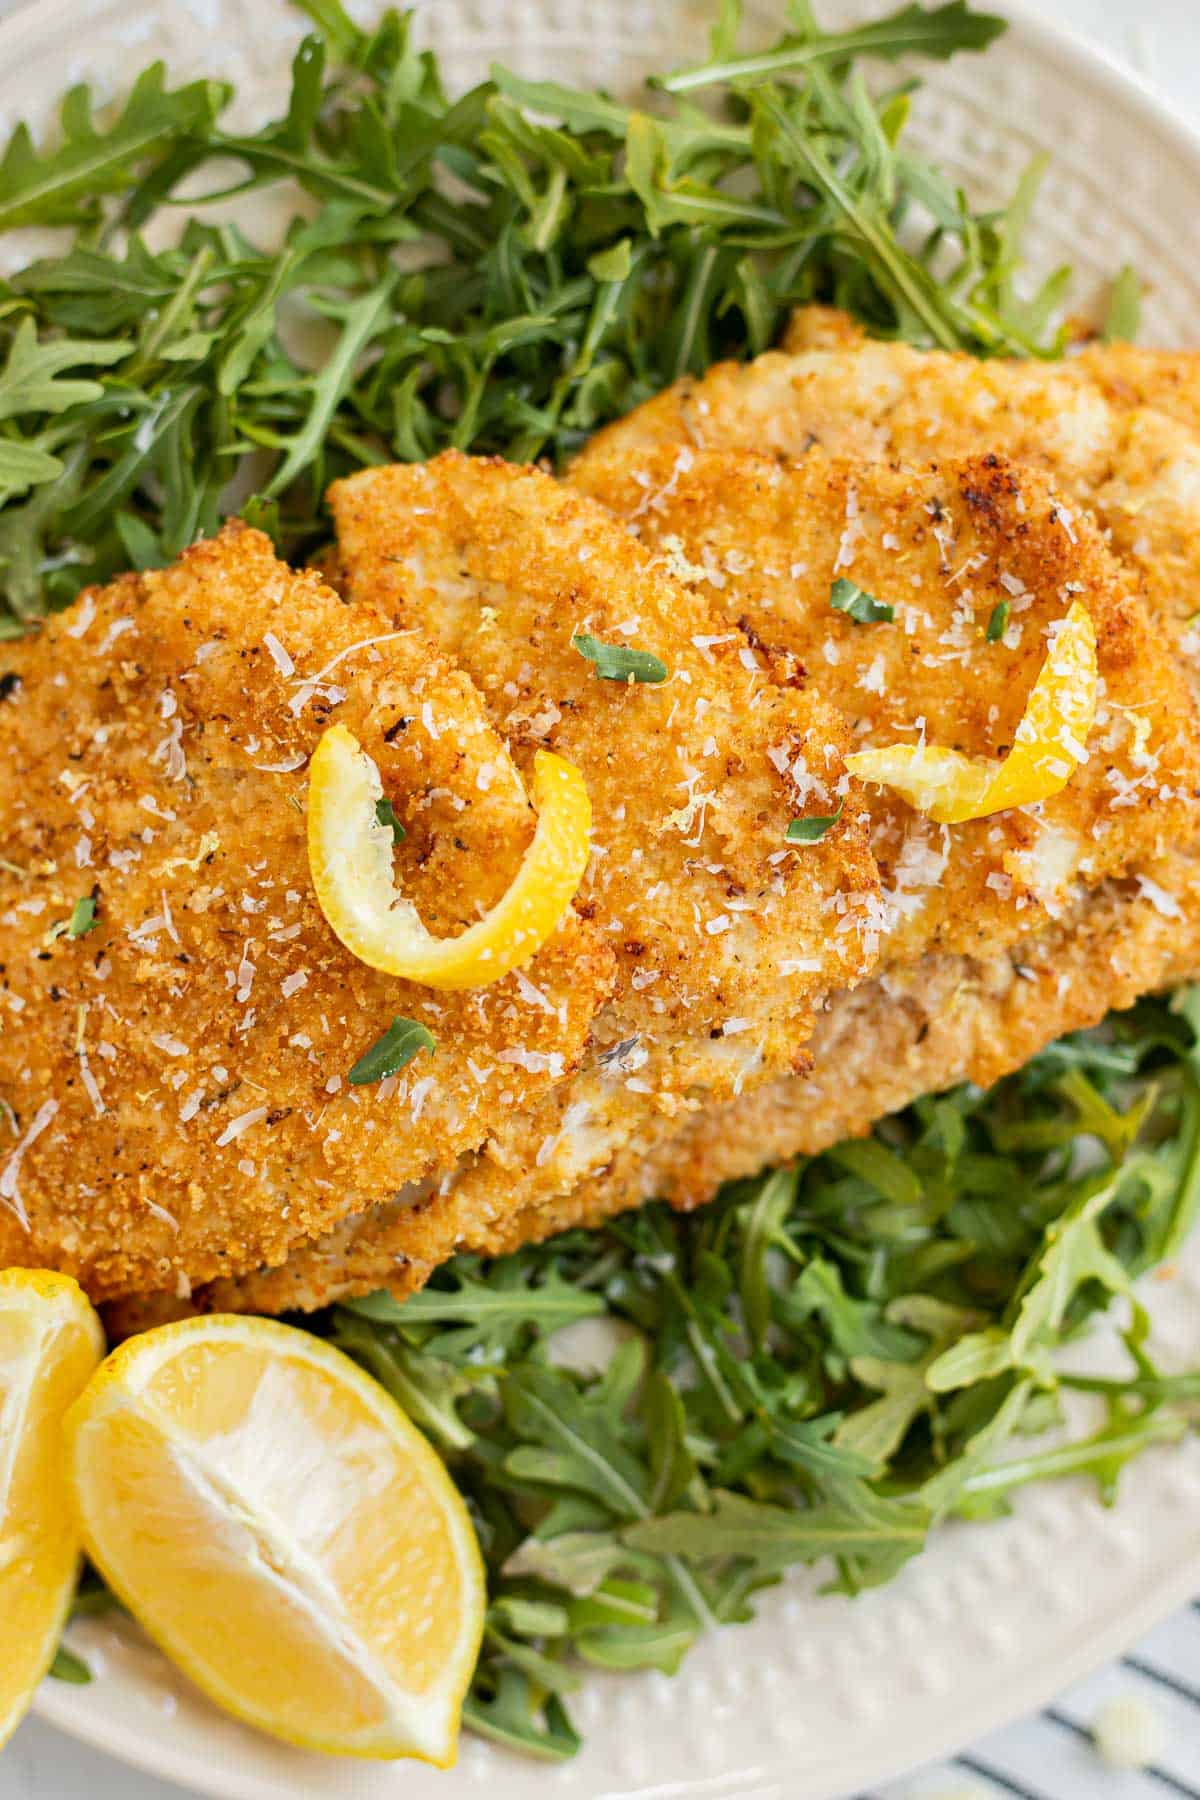 3 pieces of breaded chicken laid out on a bed of arugula.